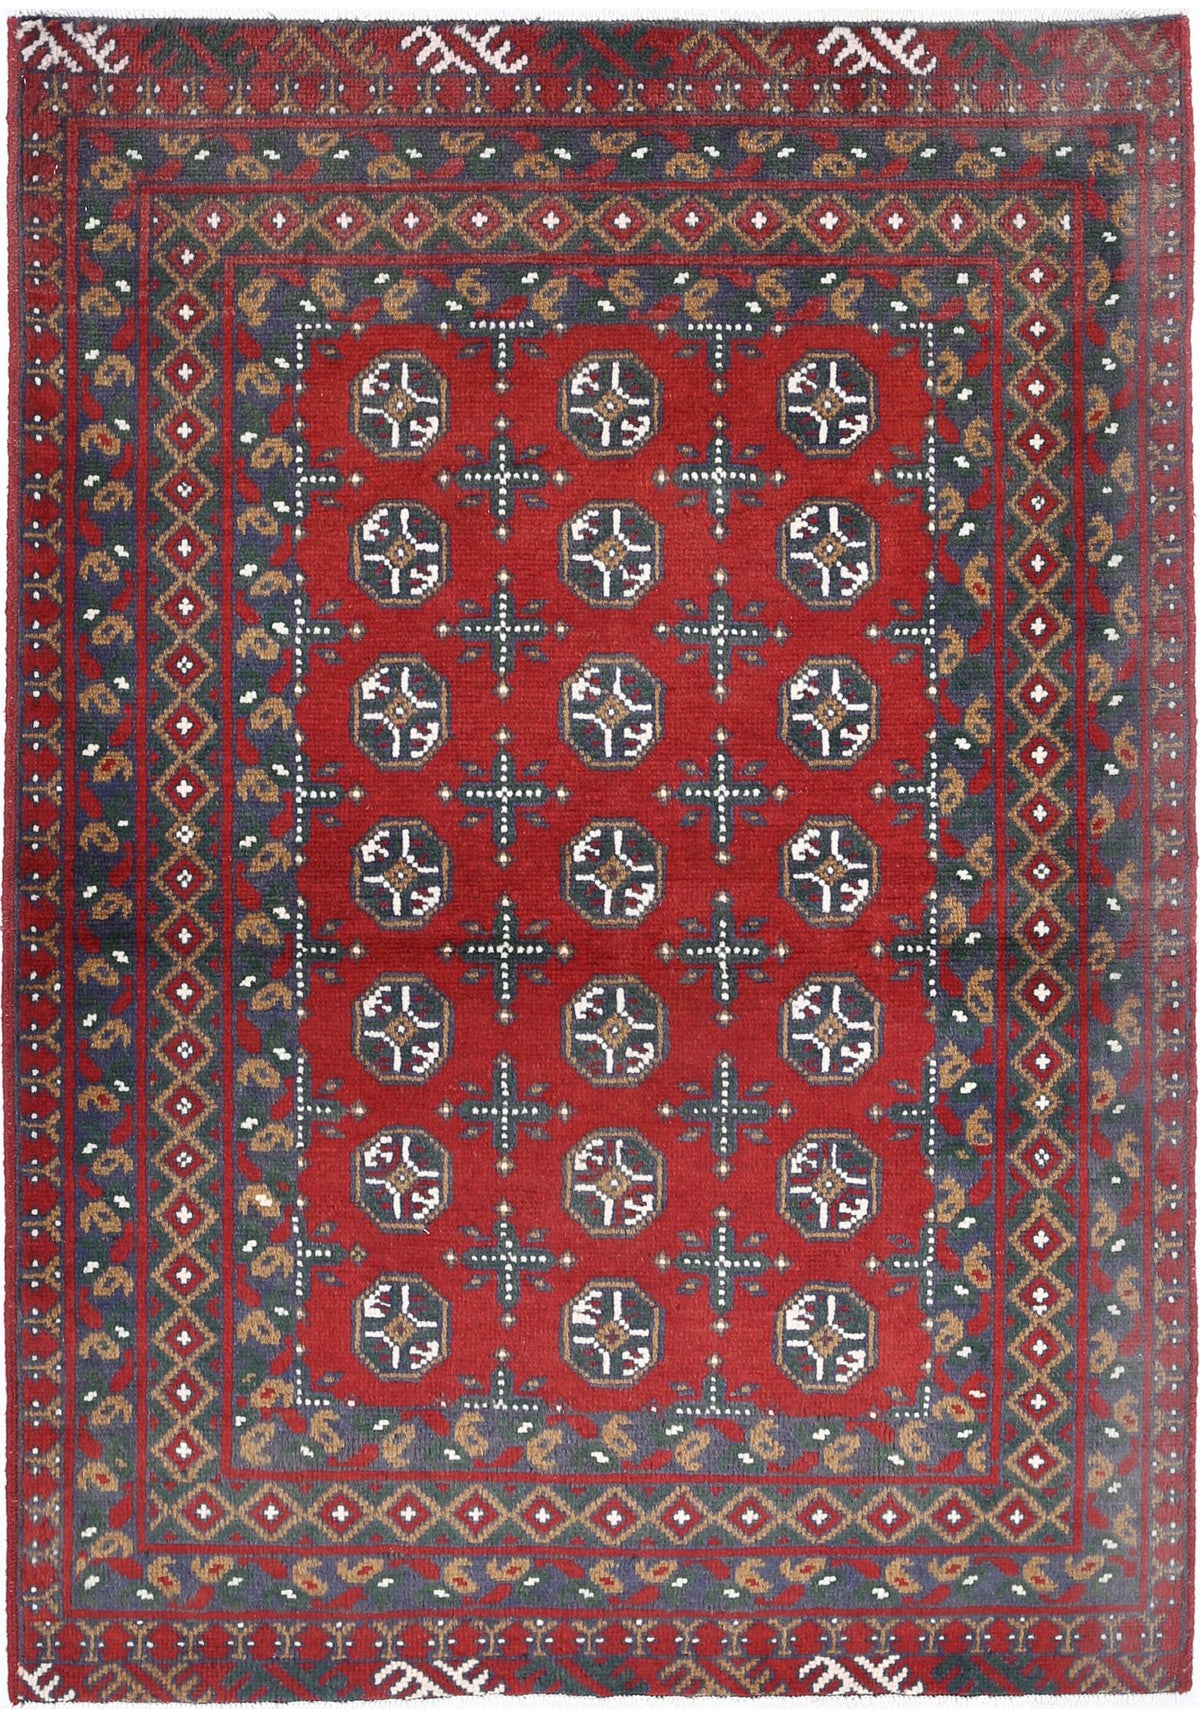 Revival-hand-knotted-gul-collection-wool-rug-5013909.jpg